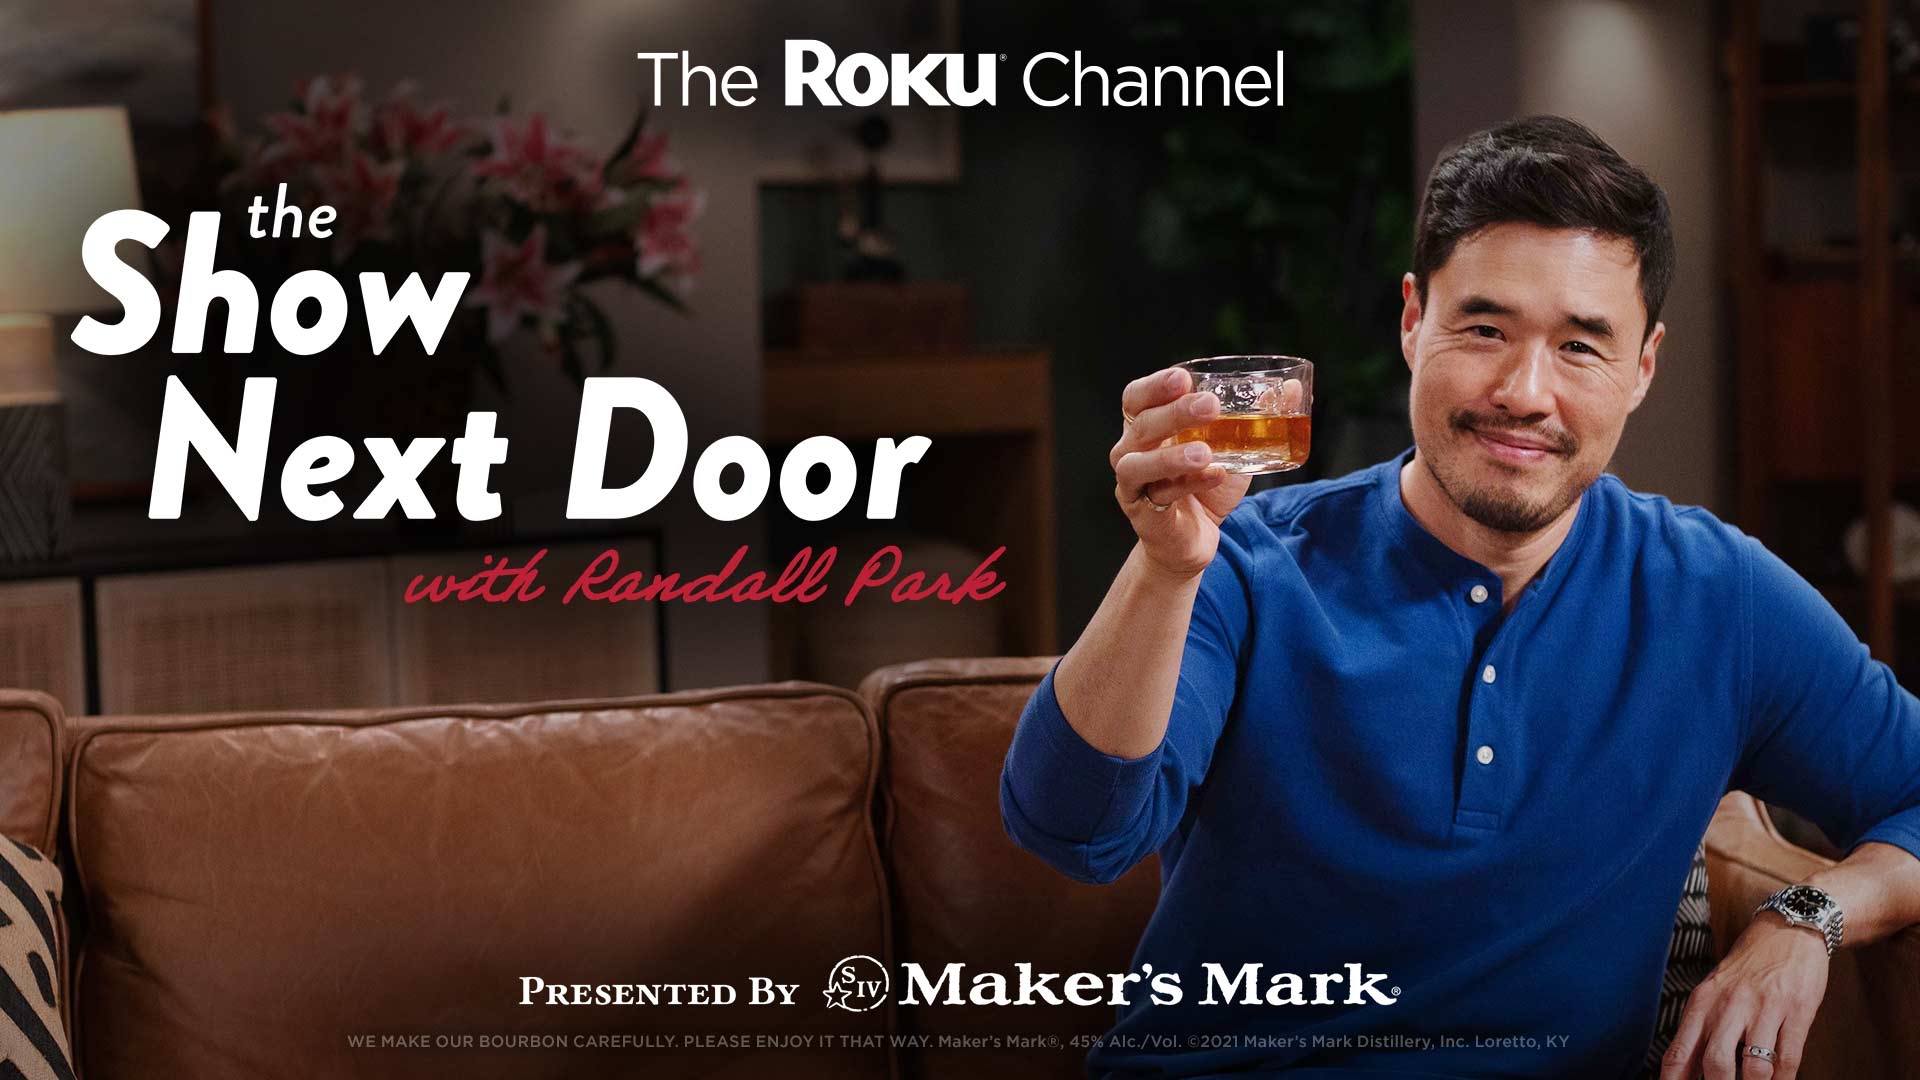 The Roku Channel Launches a New Talk Show with Maker’s Mark